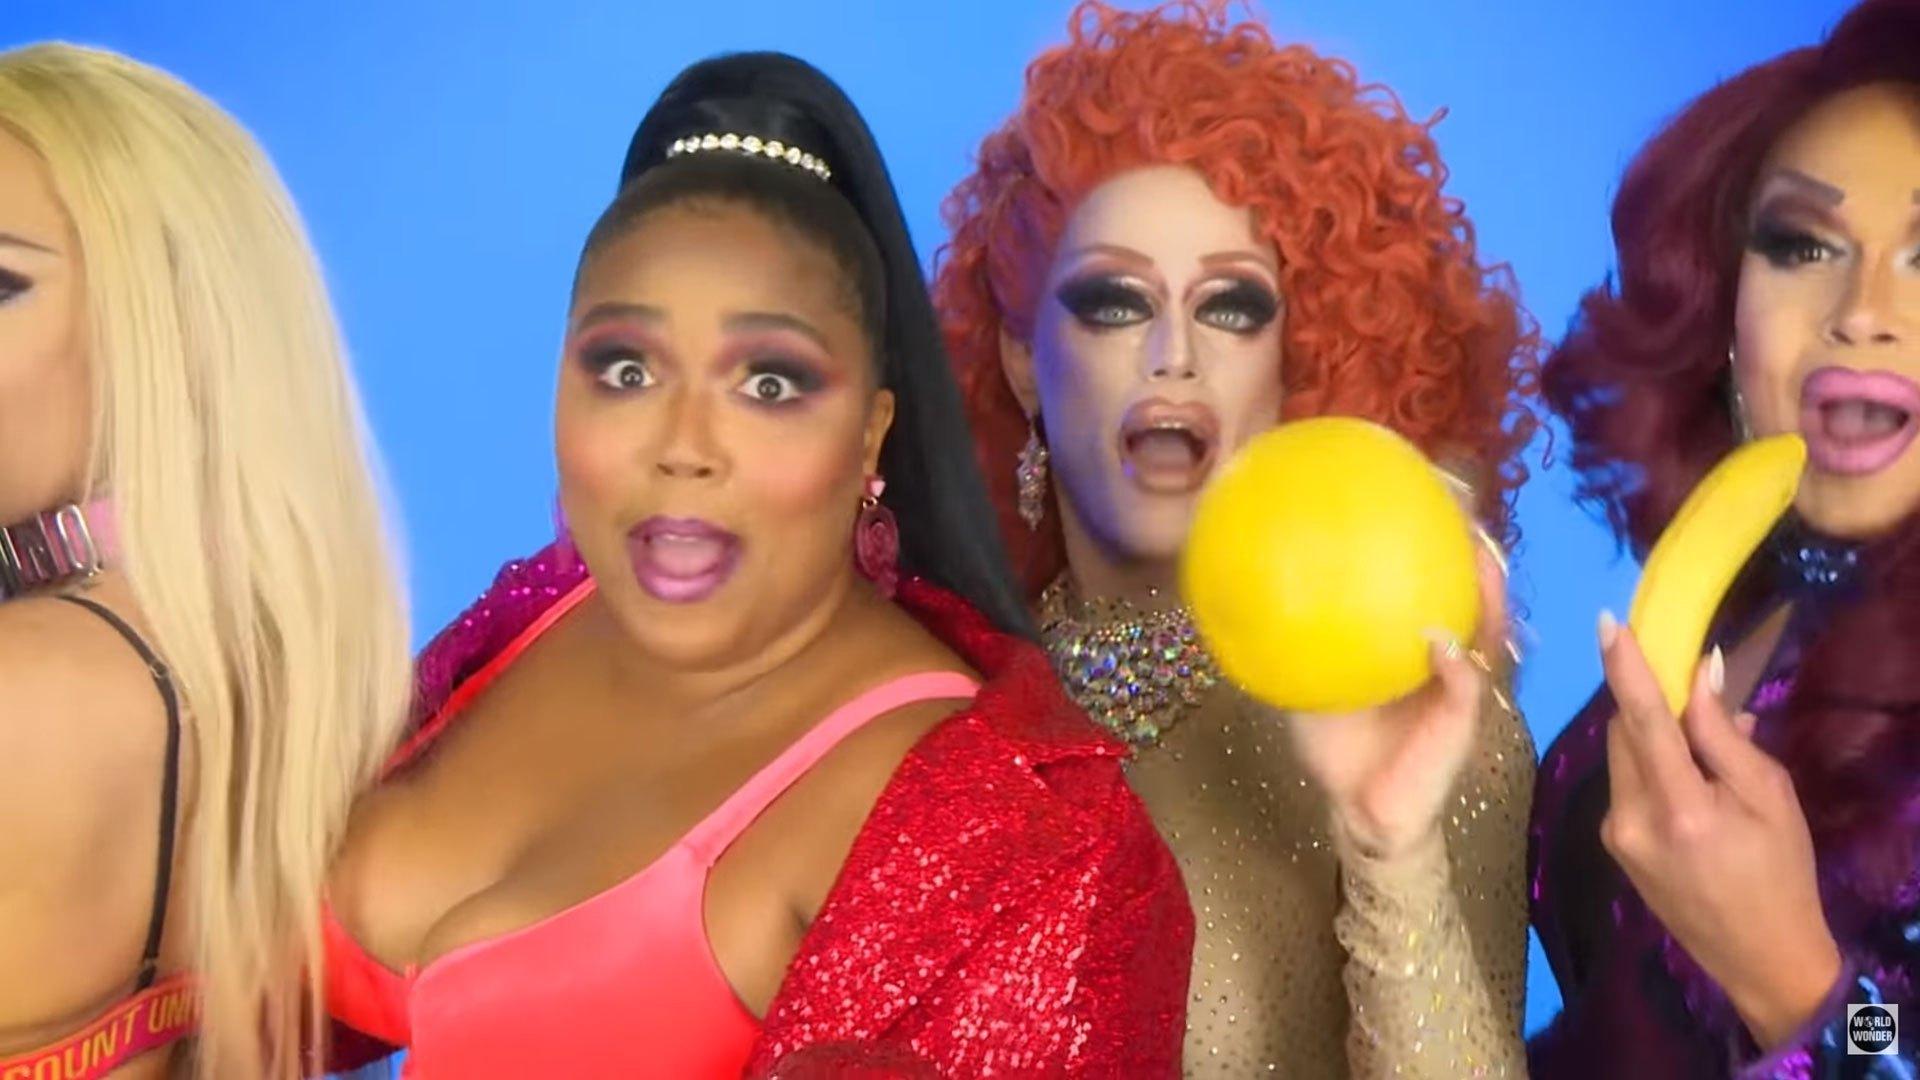 Lizzo's Newest JUICE Music Video Features RuPaul's Drag Race Stars